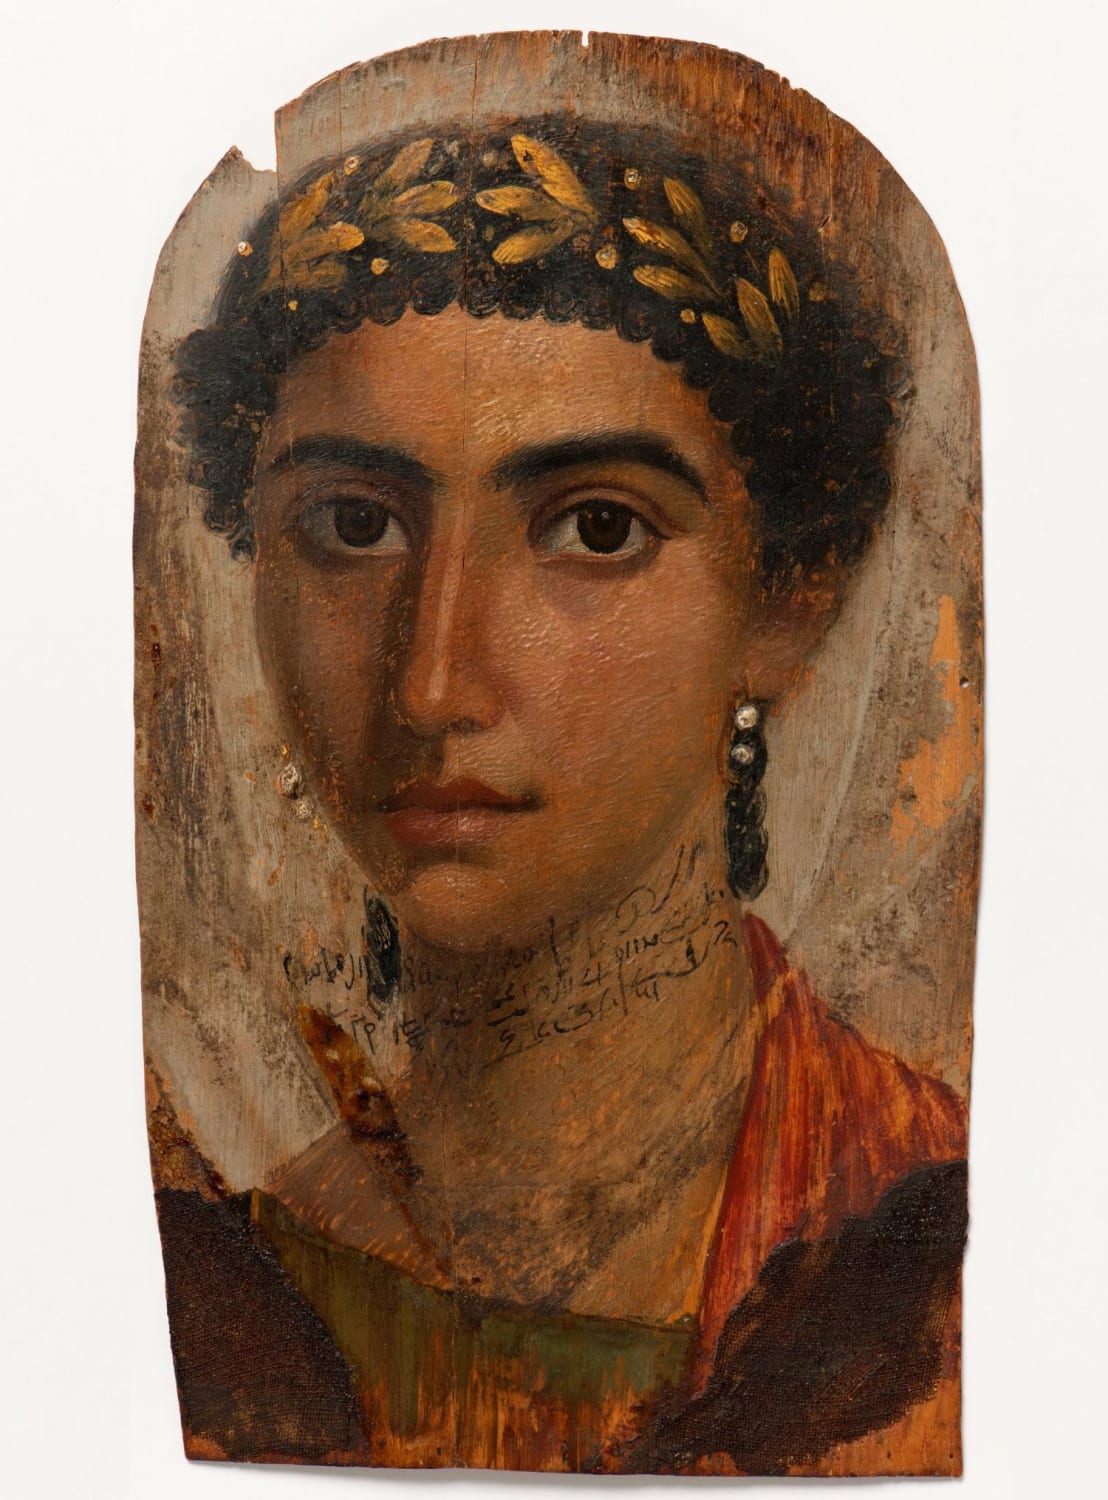 Mummy portrait of a woman named Eirene, with Demotic inscription. Egypt, 40-50 AD